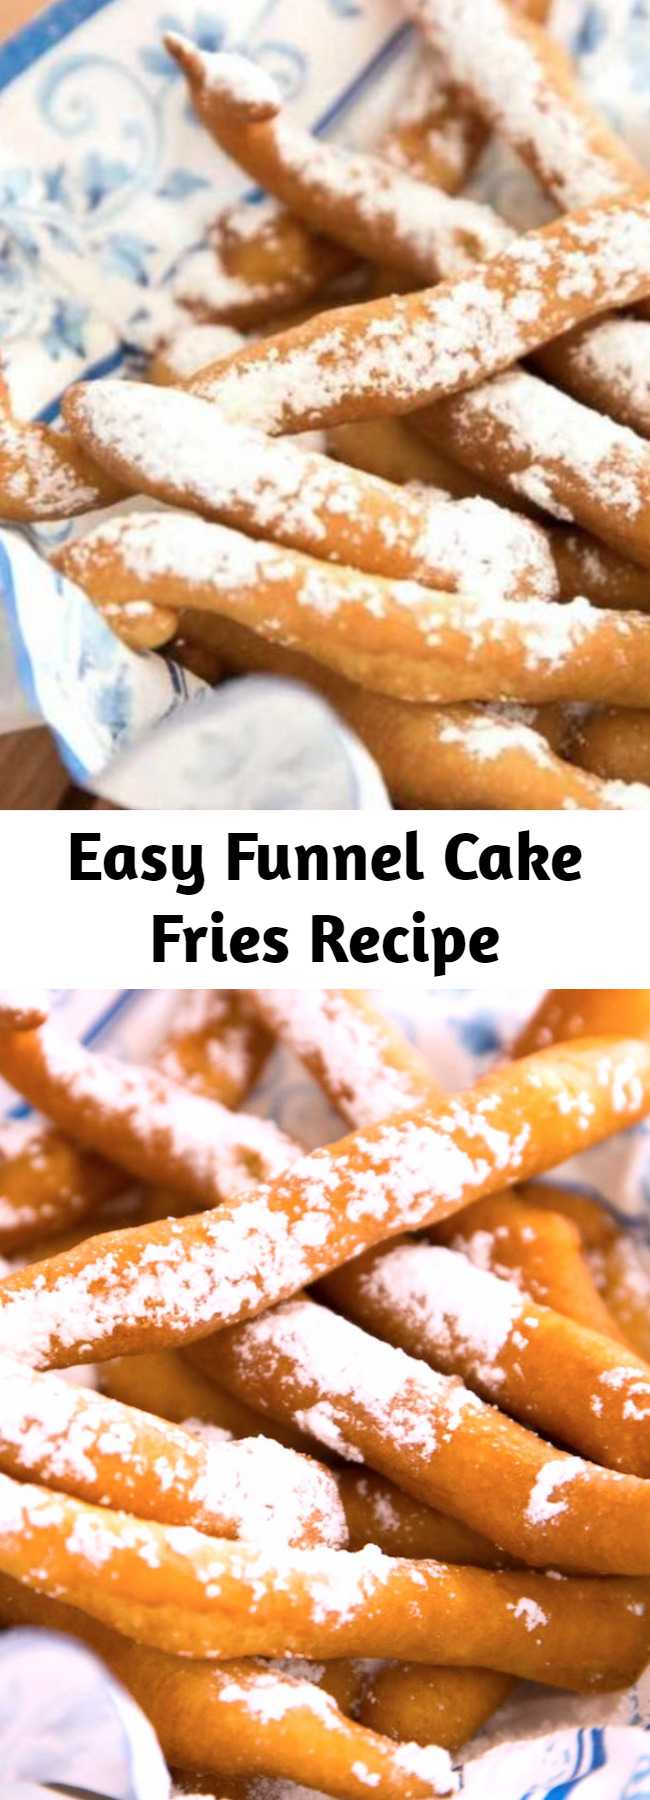 Easy Funnel Cake Fries Recipe - Funnel Cake Fries are a mouthwatering snack that's crispy on the outside and fluffy on the inside. Make them at home in just 20 minutes and serve with caramel sauce or marshmallow fluff. Perfect for parties!